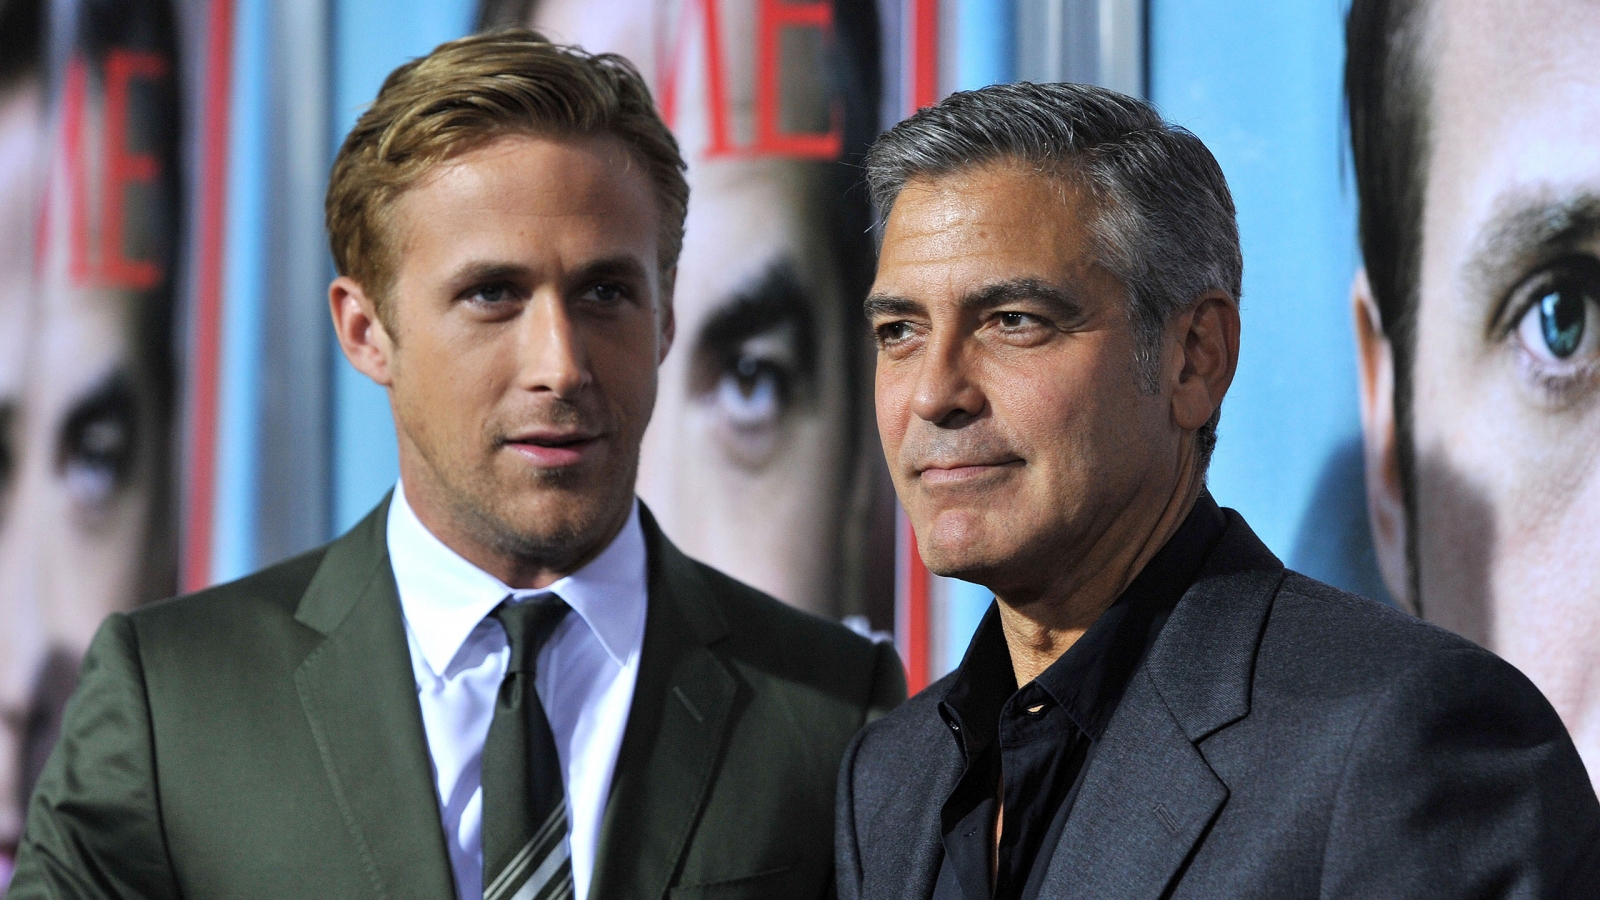 George Clooney and Ryan Gosling for 1600 x 900 HDTV resolution